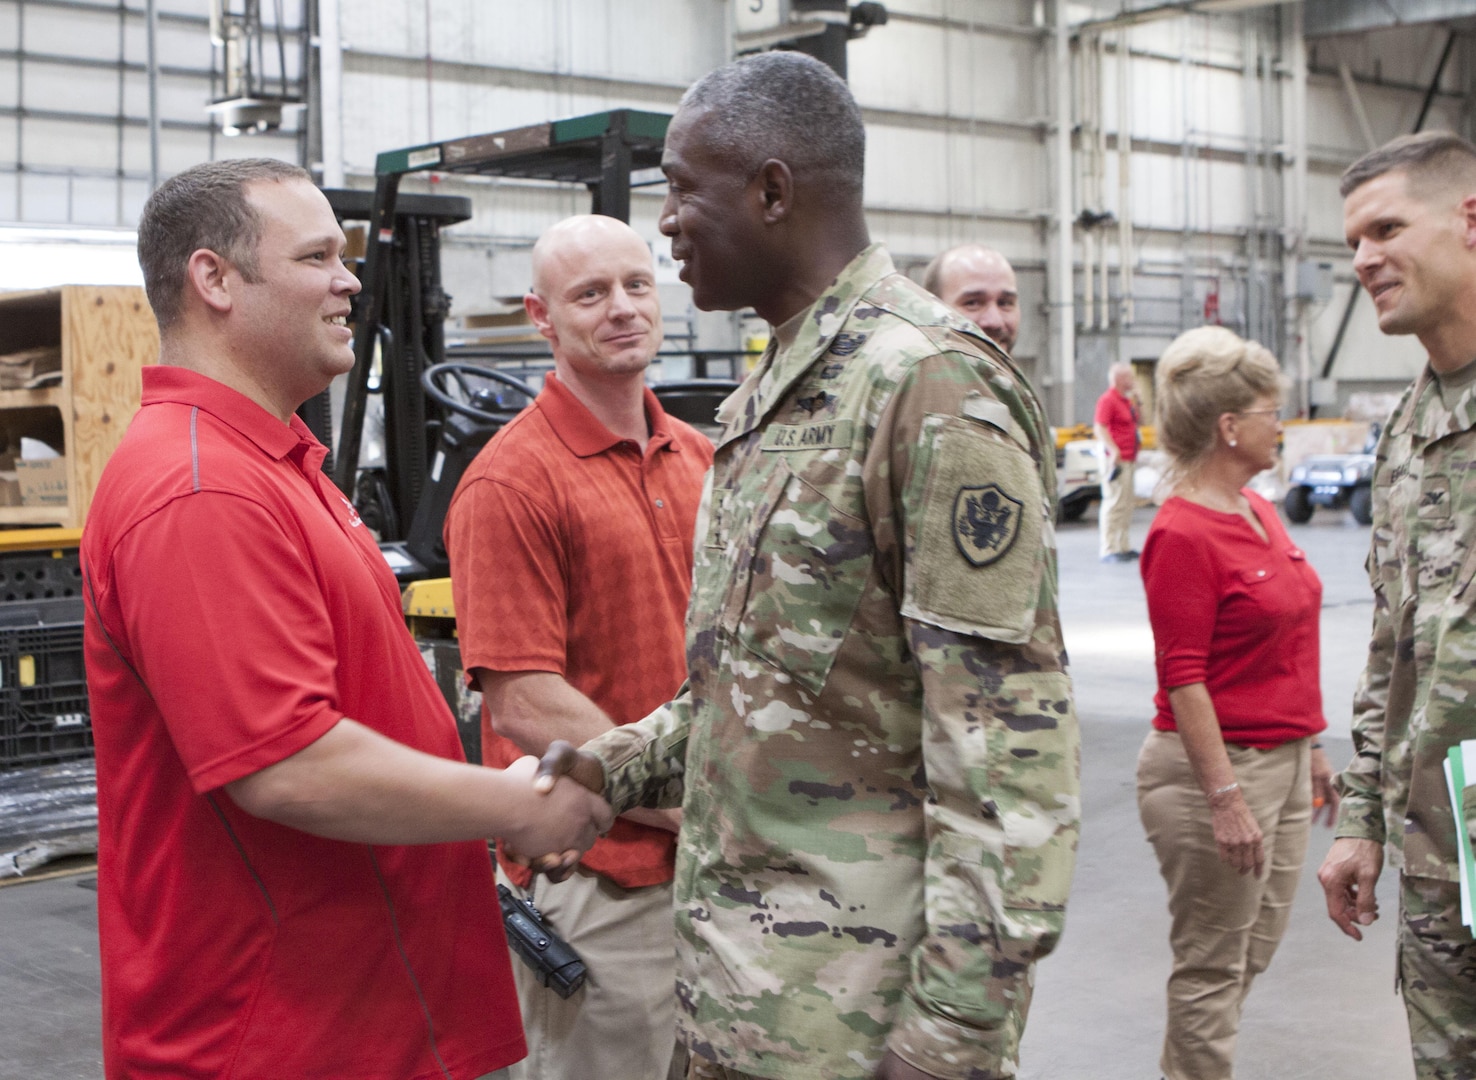 Army Col. Brad Eungard (far right), commander of DLA Distribution Susquehanna, leads DLA Director Army Lt. Gen. Darrell K. Williams (center) on a tour through the facility. Williams met the Susquehanna workforce and talked with them as they described their roles in the agency.